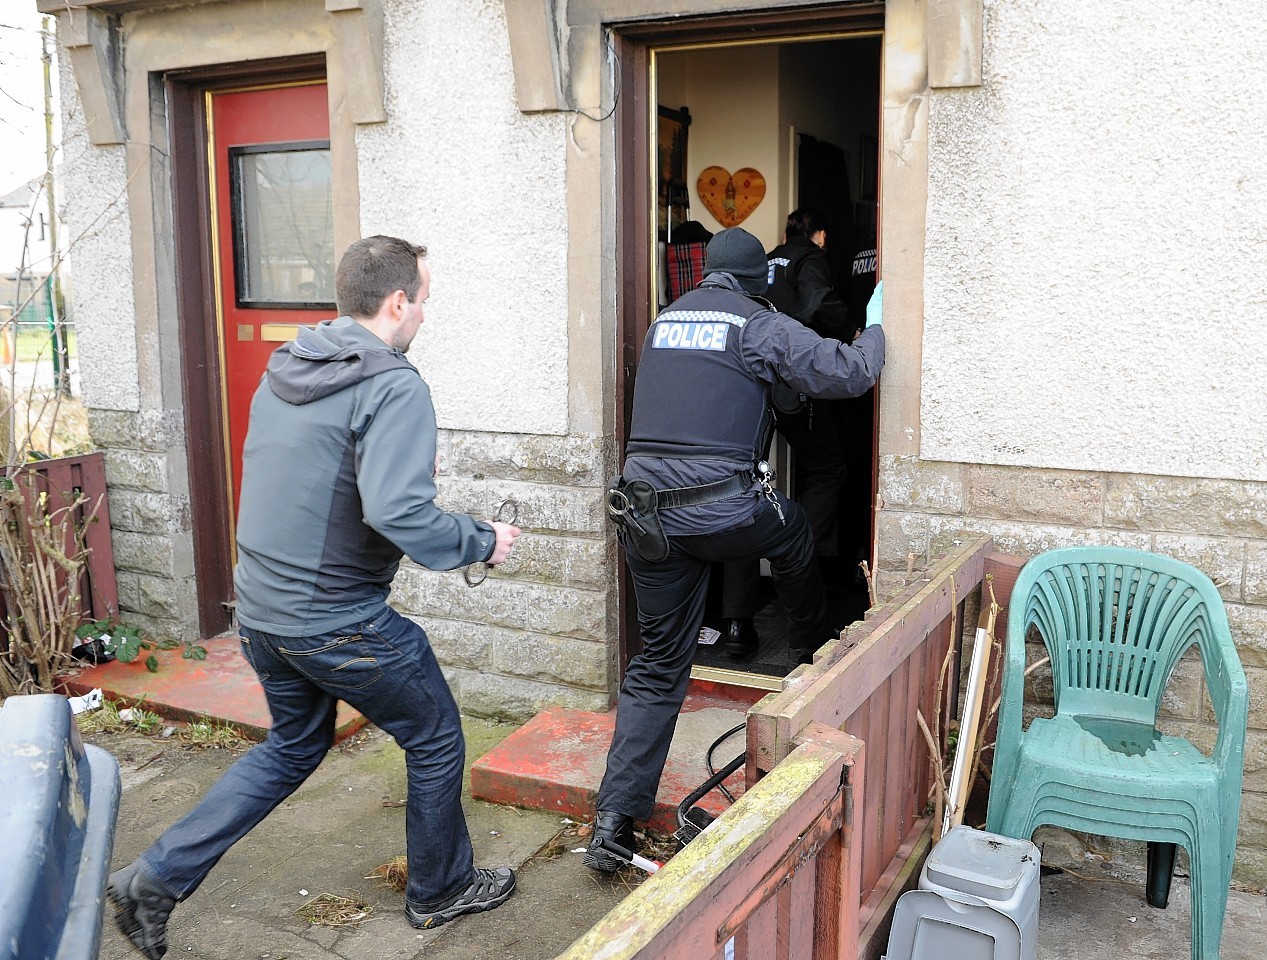 Police raided homes for drugs across the Highlands